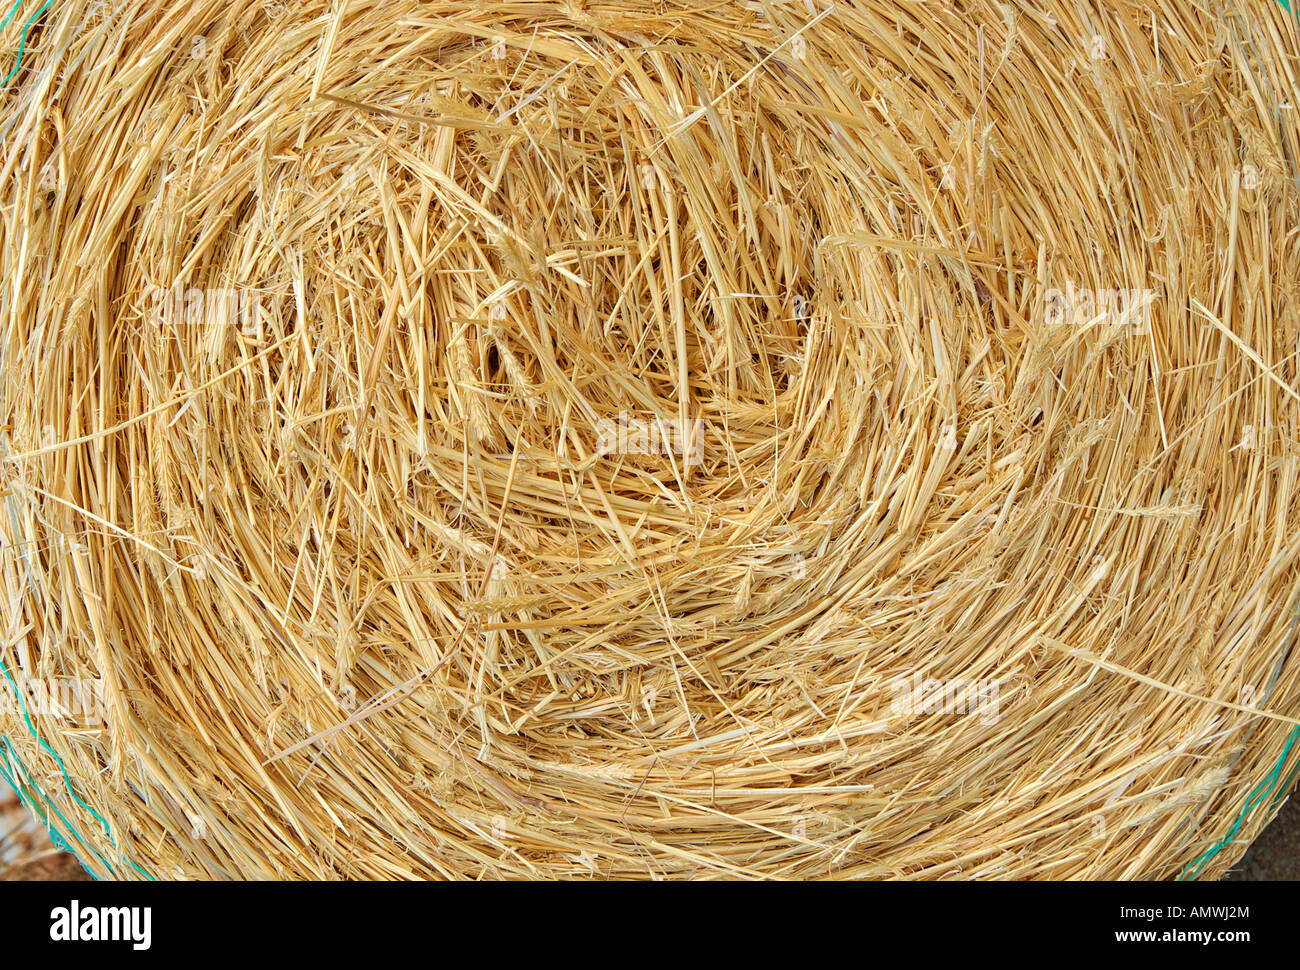 a big round bale of yellow straw for stock feed Stock Photo